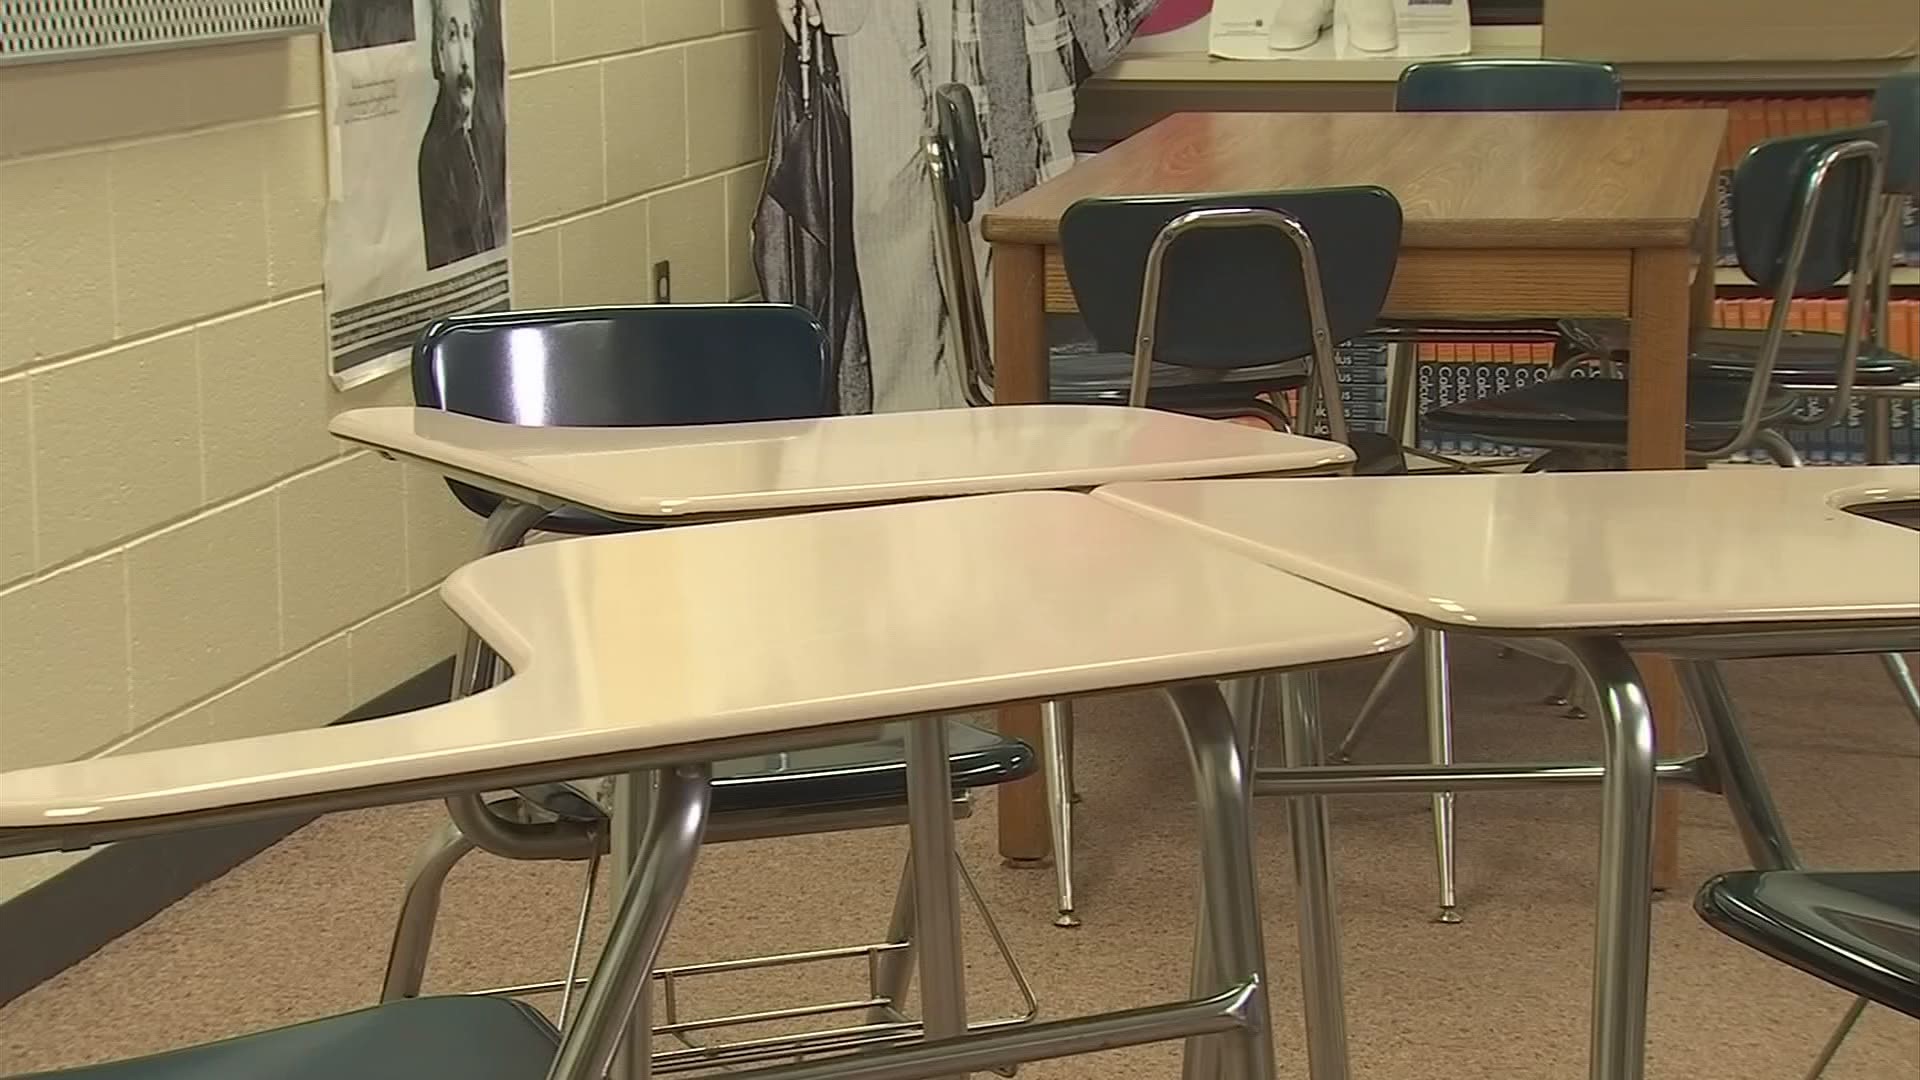 Columbus City Schools have now settled on a tentative plan to bring kids back to the classroom.